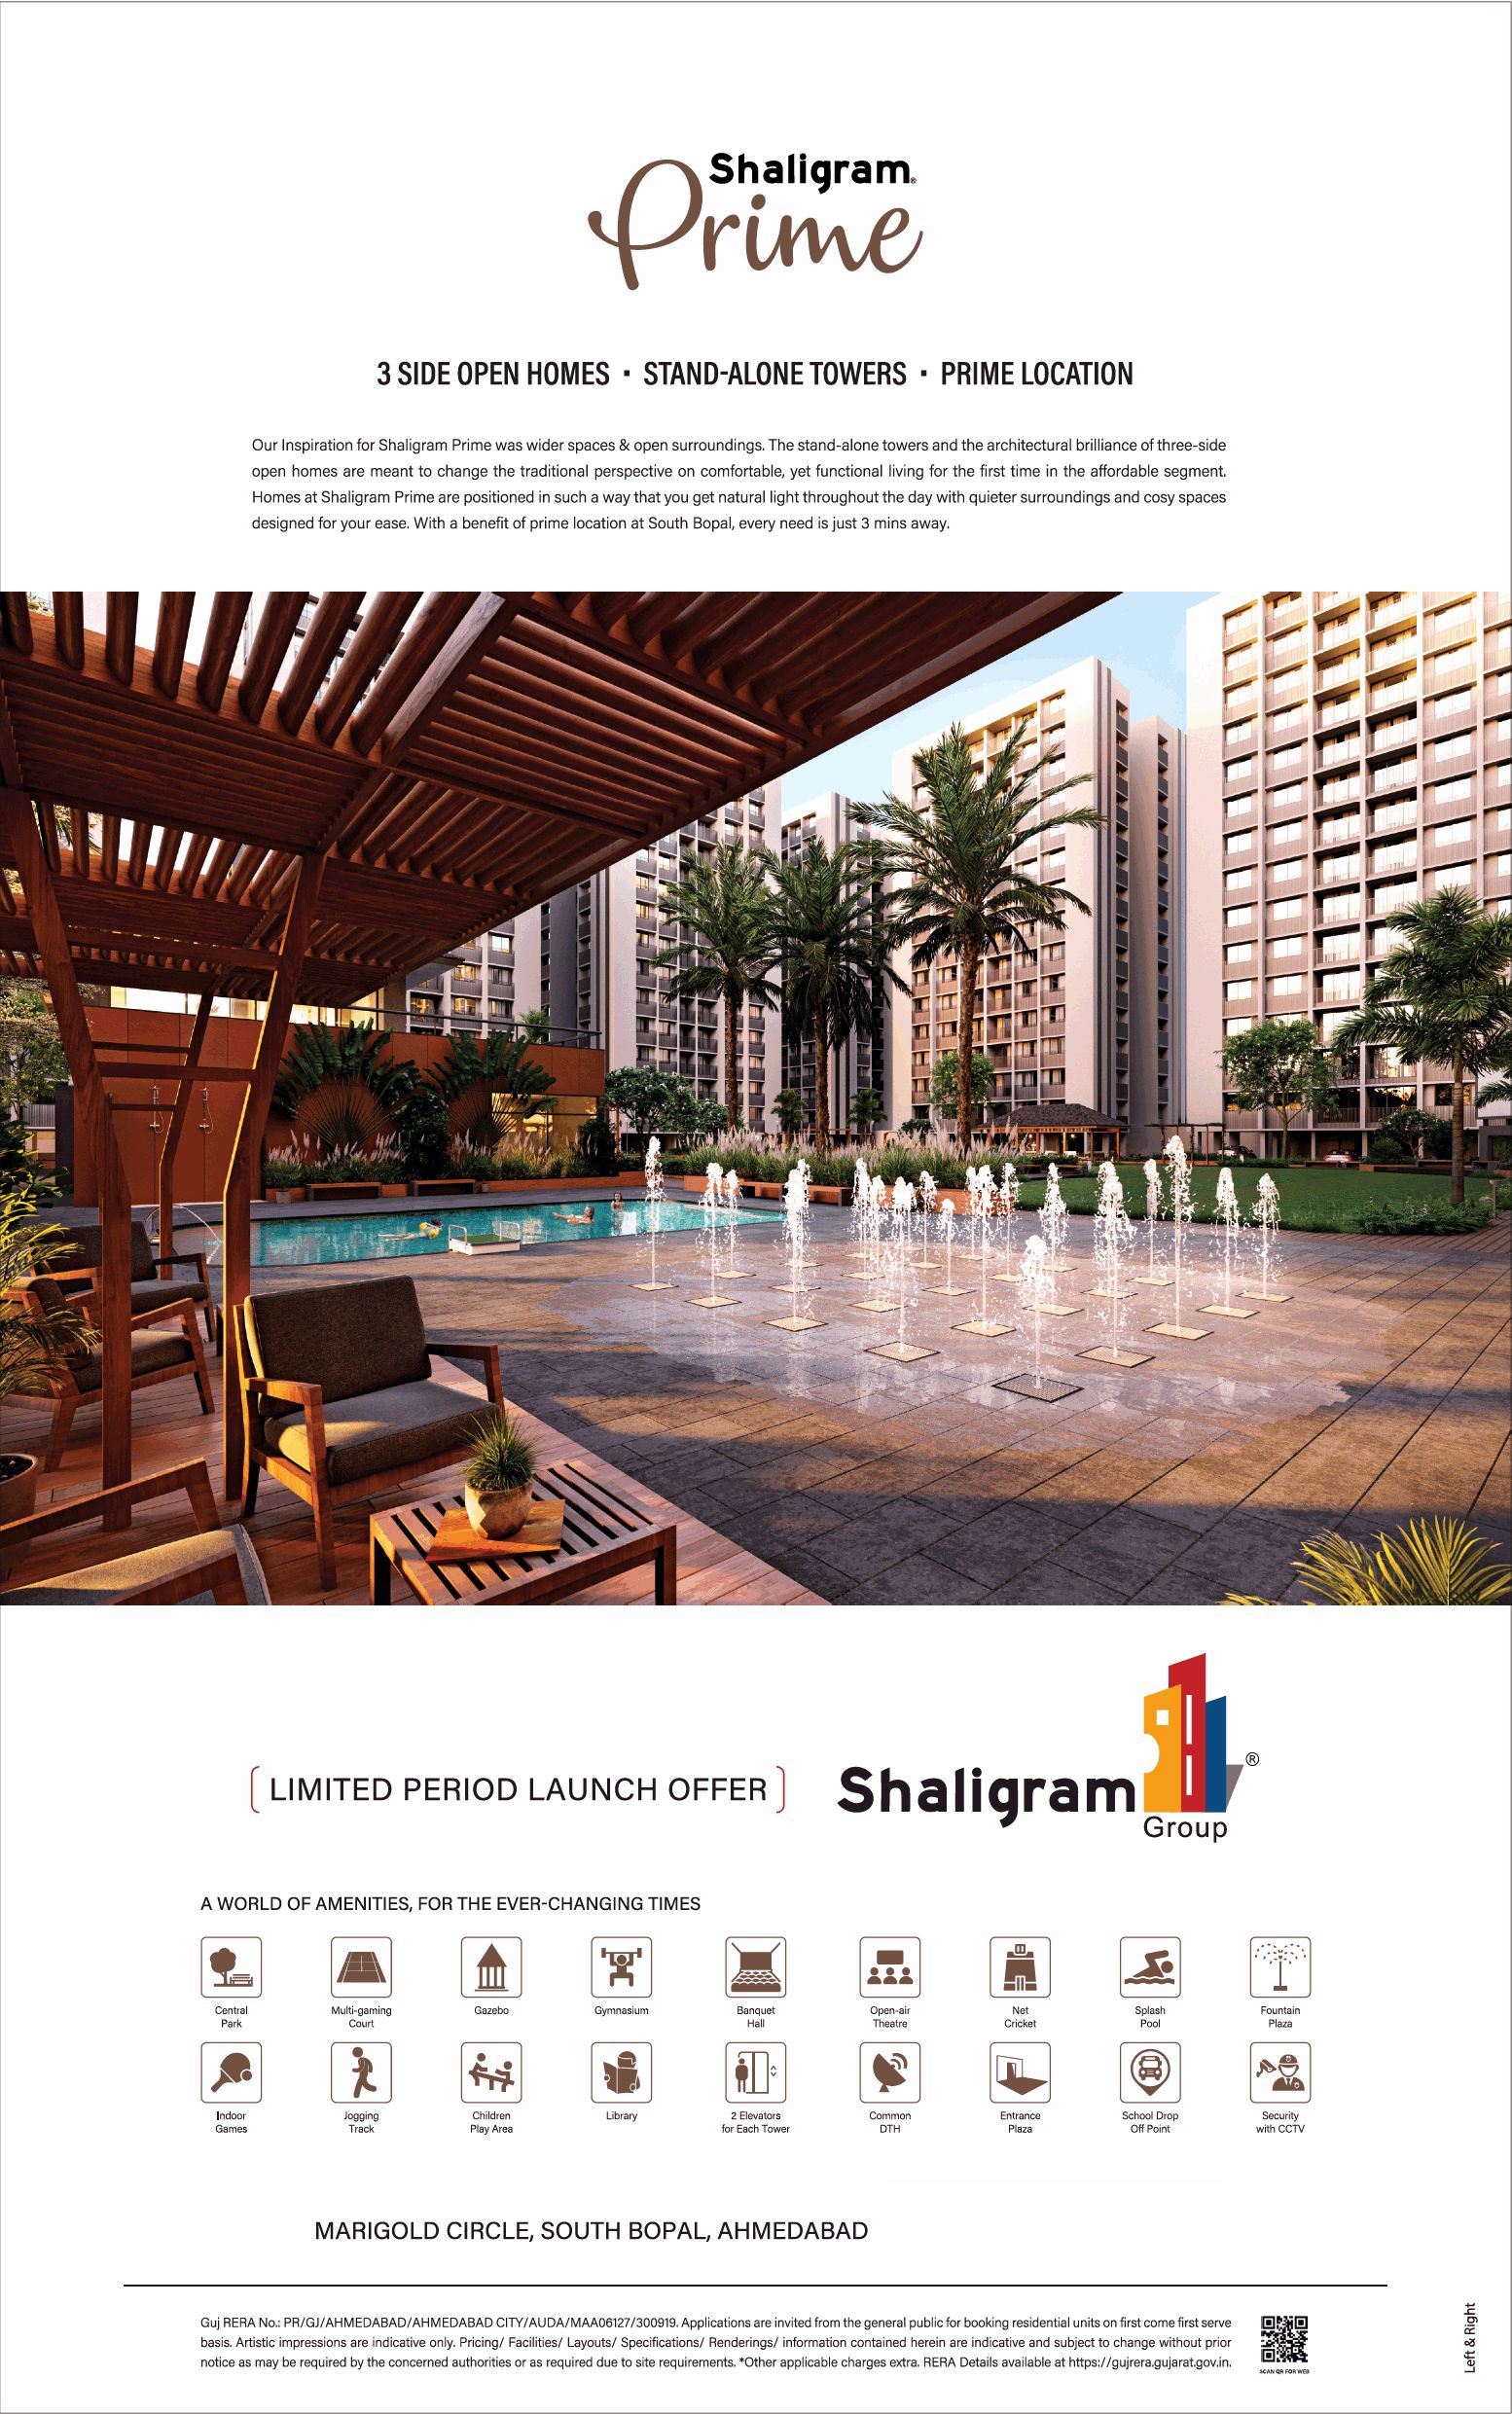 Presenting 3 side open homes, stand-alone towers and prime location at Shaligram Prime, Ahmedabad Update